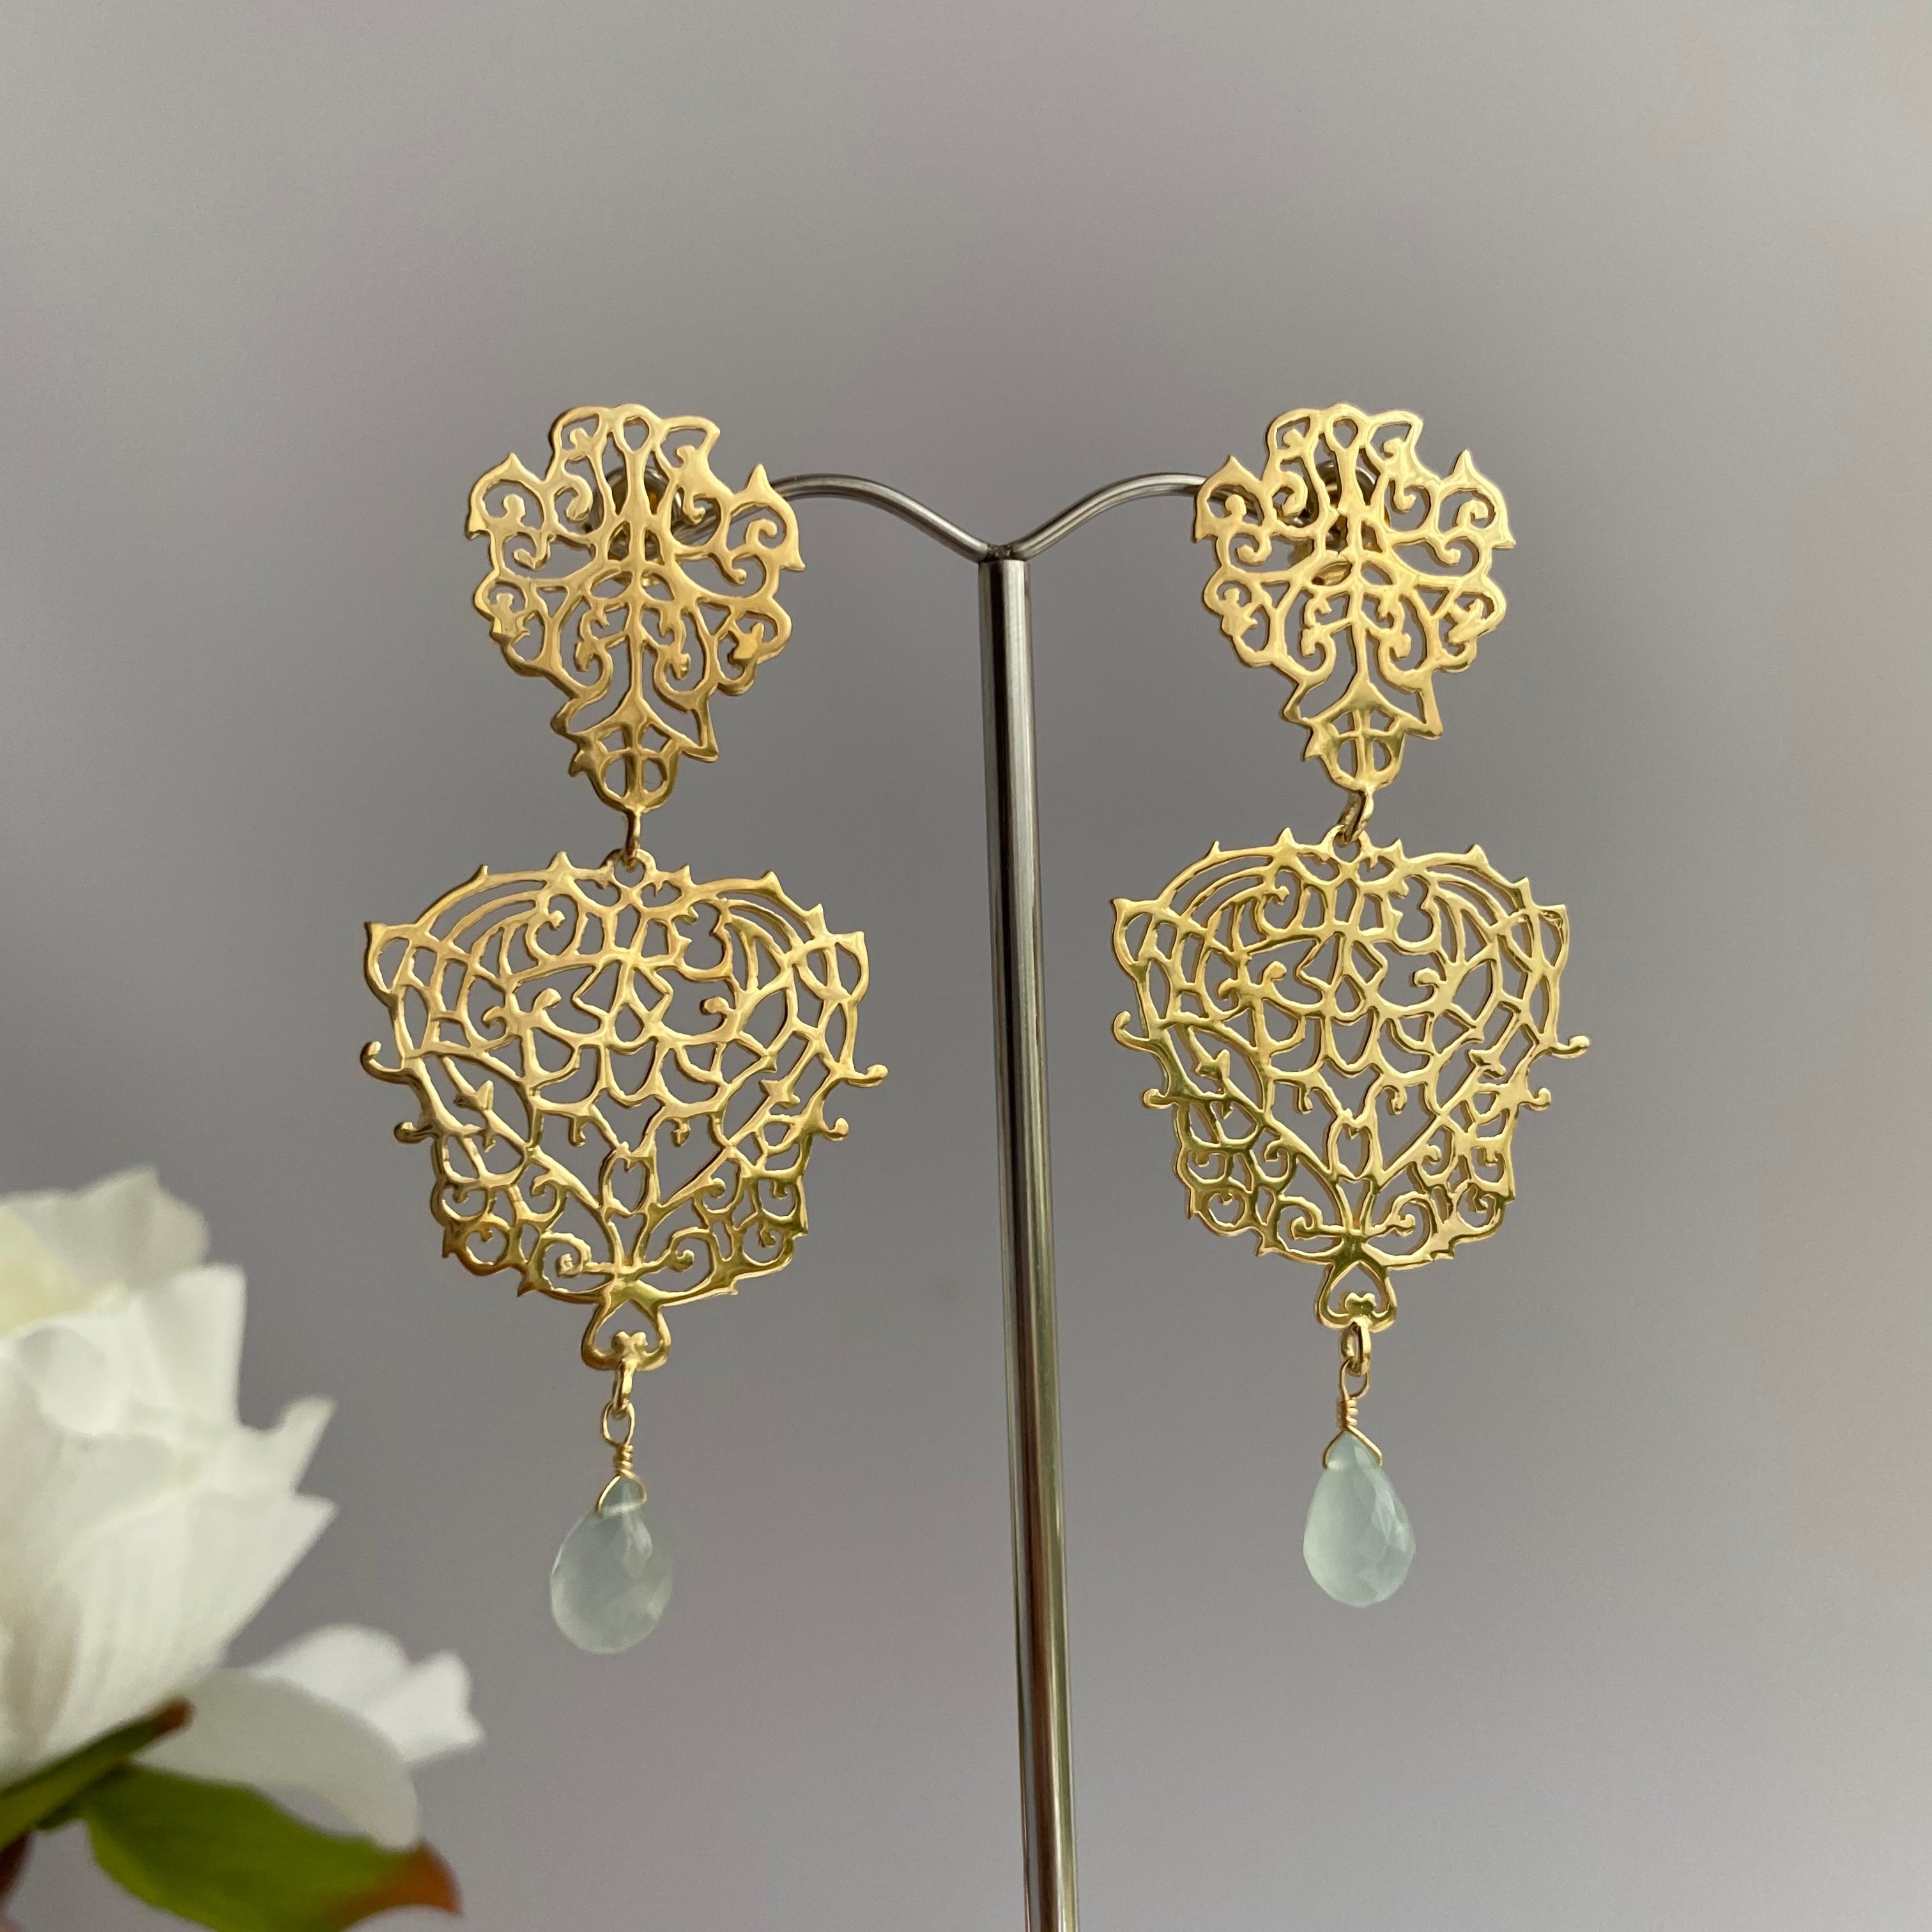 Gold Plated Sterling Silver Intricate Filigree Long Earrings with Stone Drop - Aqua Chalcedony